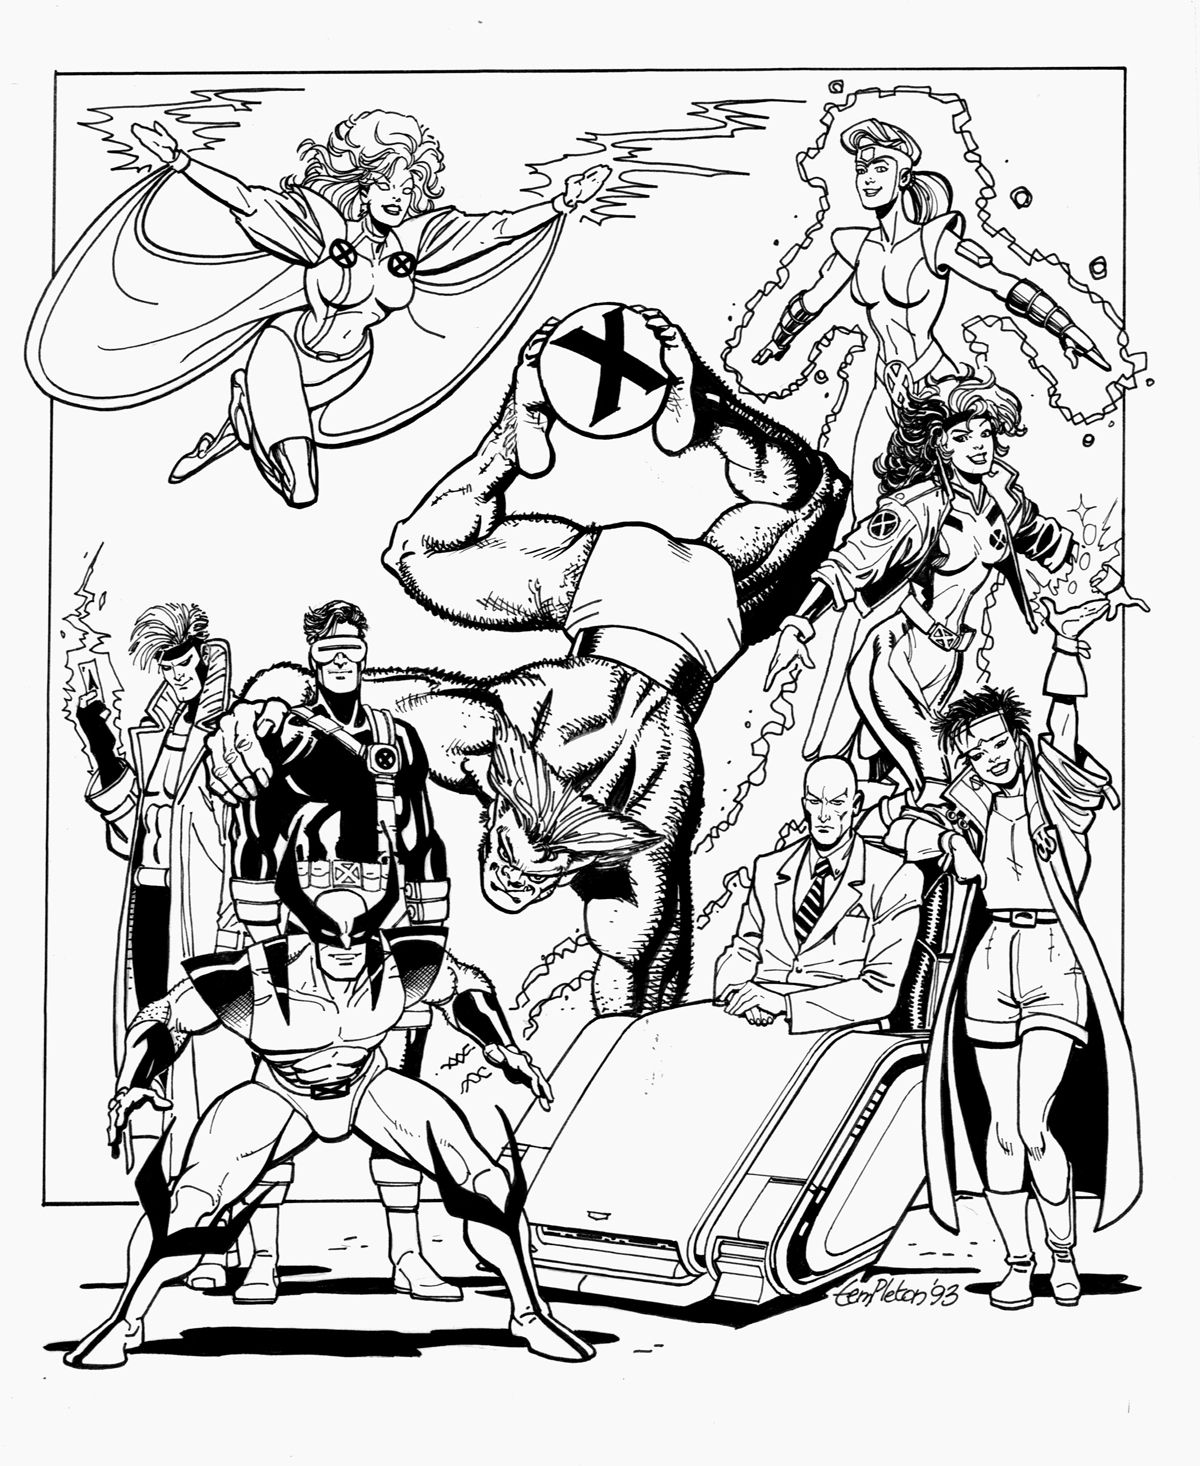 X men superheroes, From the gallery : Books | Cartoon coloring pages,  Superhero coloring pages, Superhero coloring